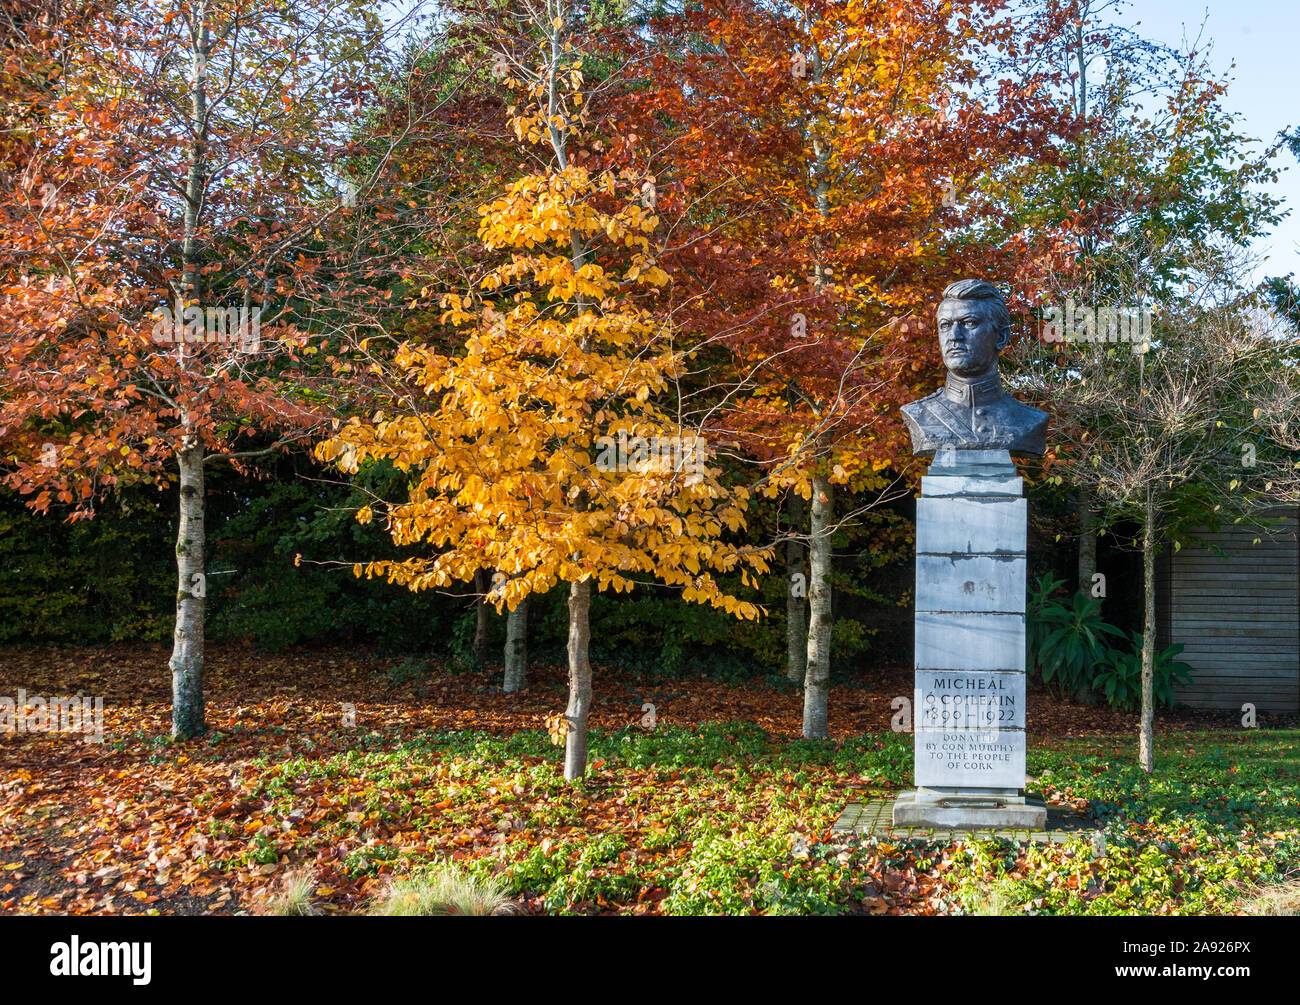 Cork City, Cork, Ireland. 12th November, 2019. Sculptures is of Michael Collins by Seamus Murphy in Fitzgerald's Park which is the largest public park Stock Photo